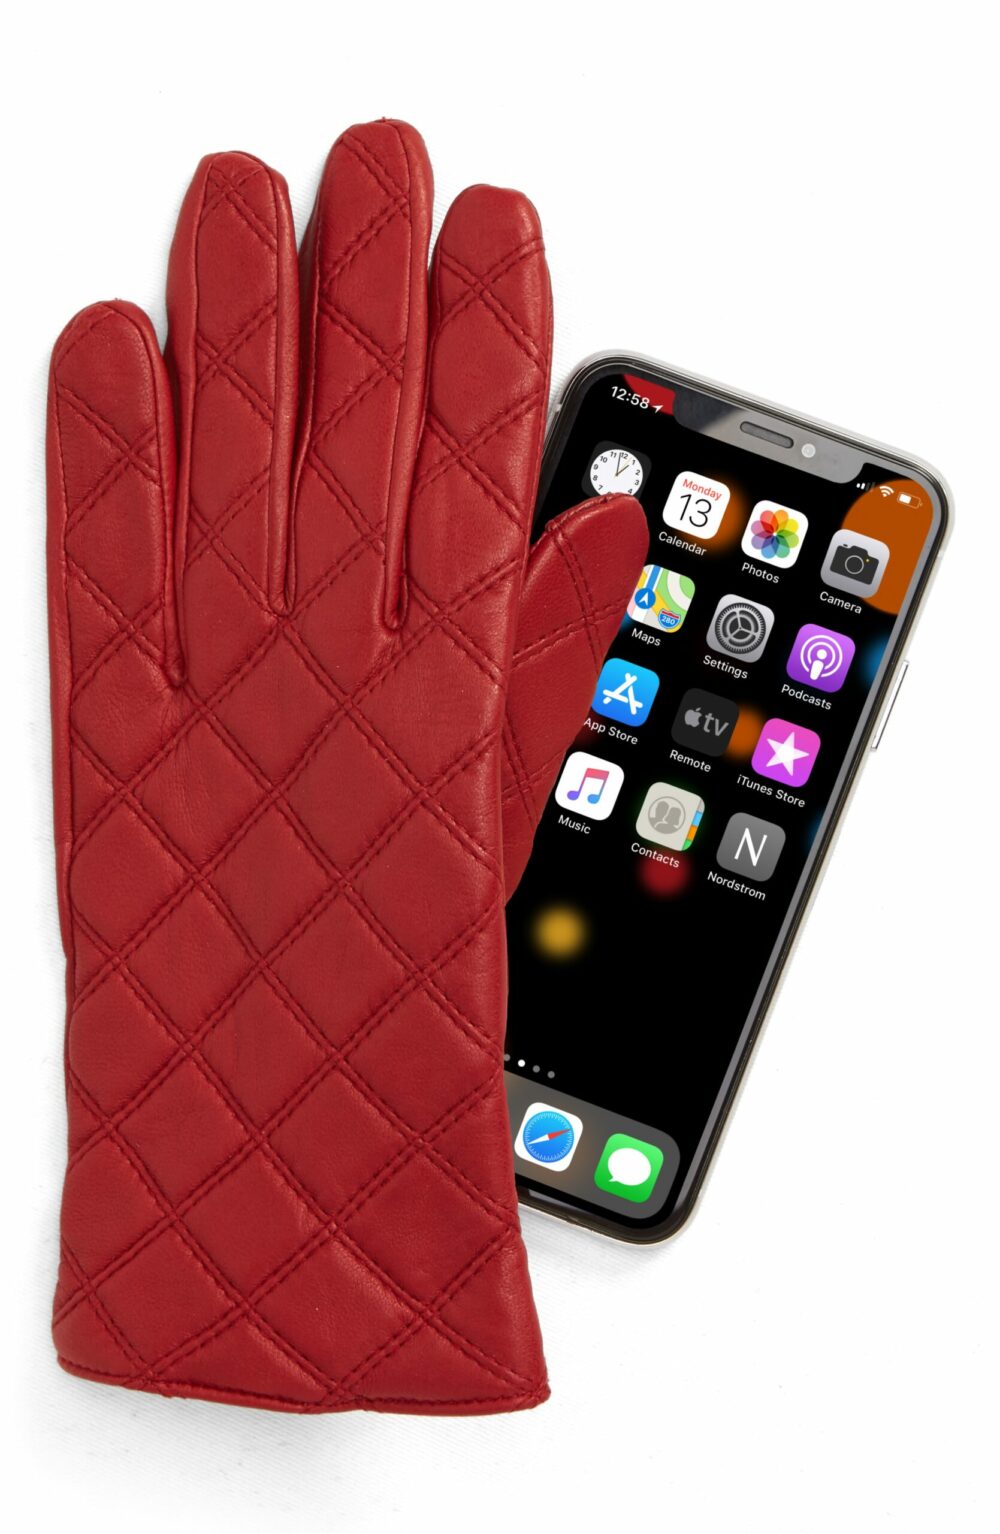 quilted red leather tech gloves